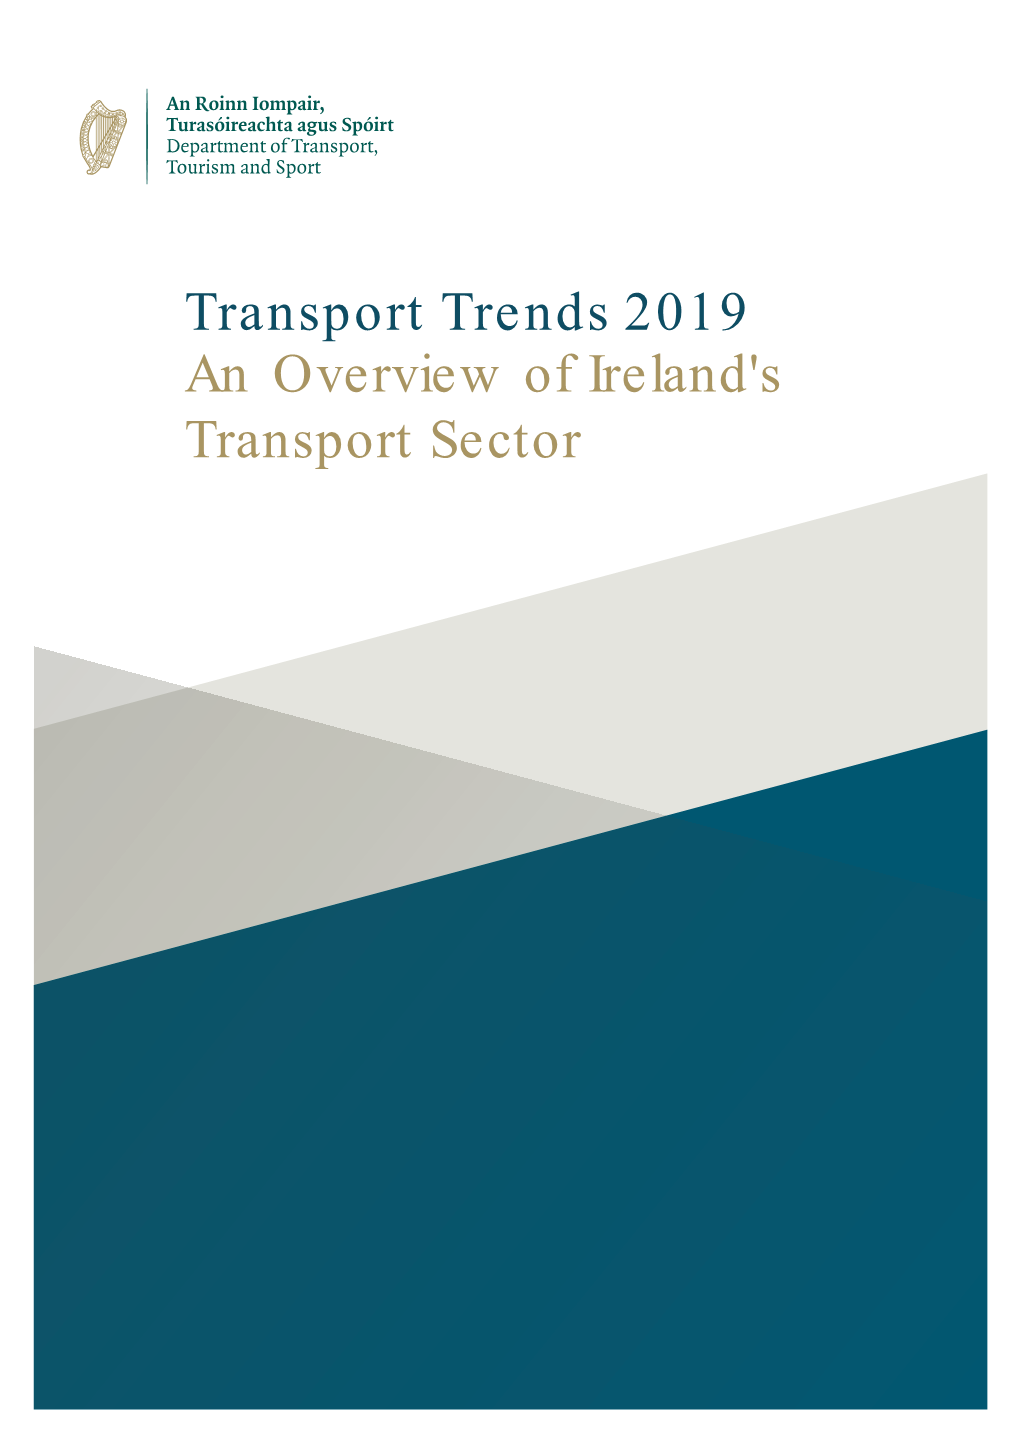 Transport Trends 2019 an Overview of Ireland's Transport Sector